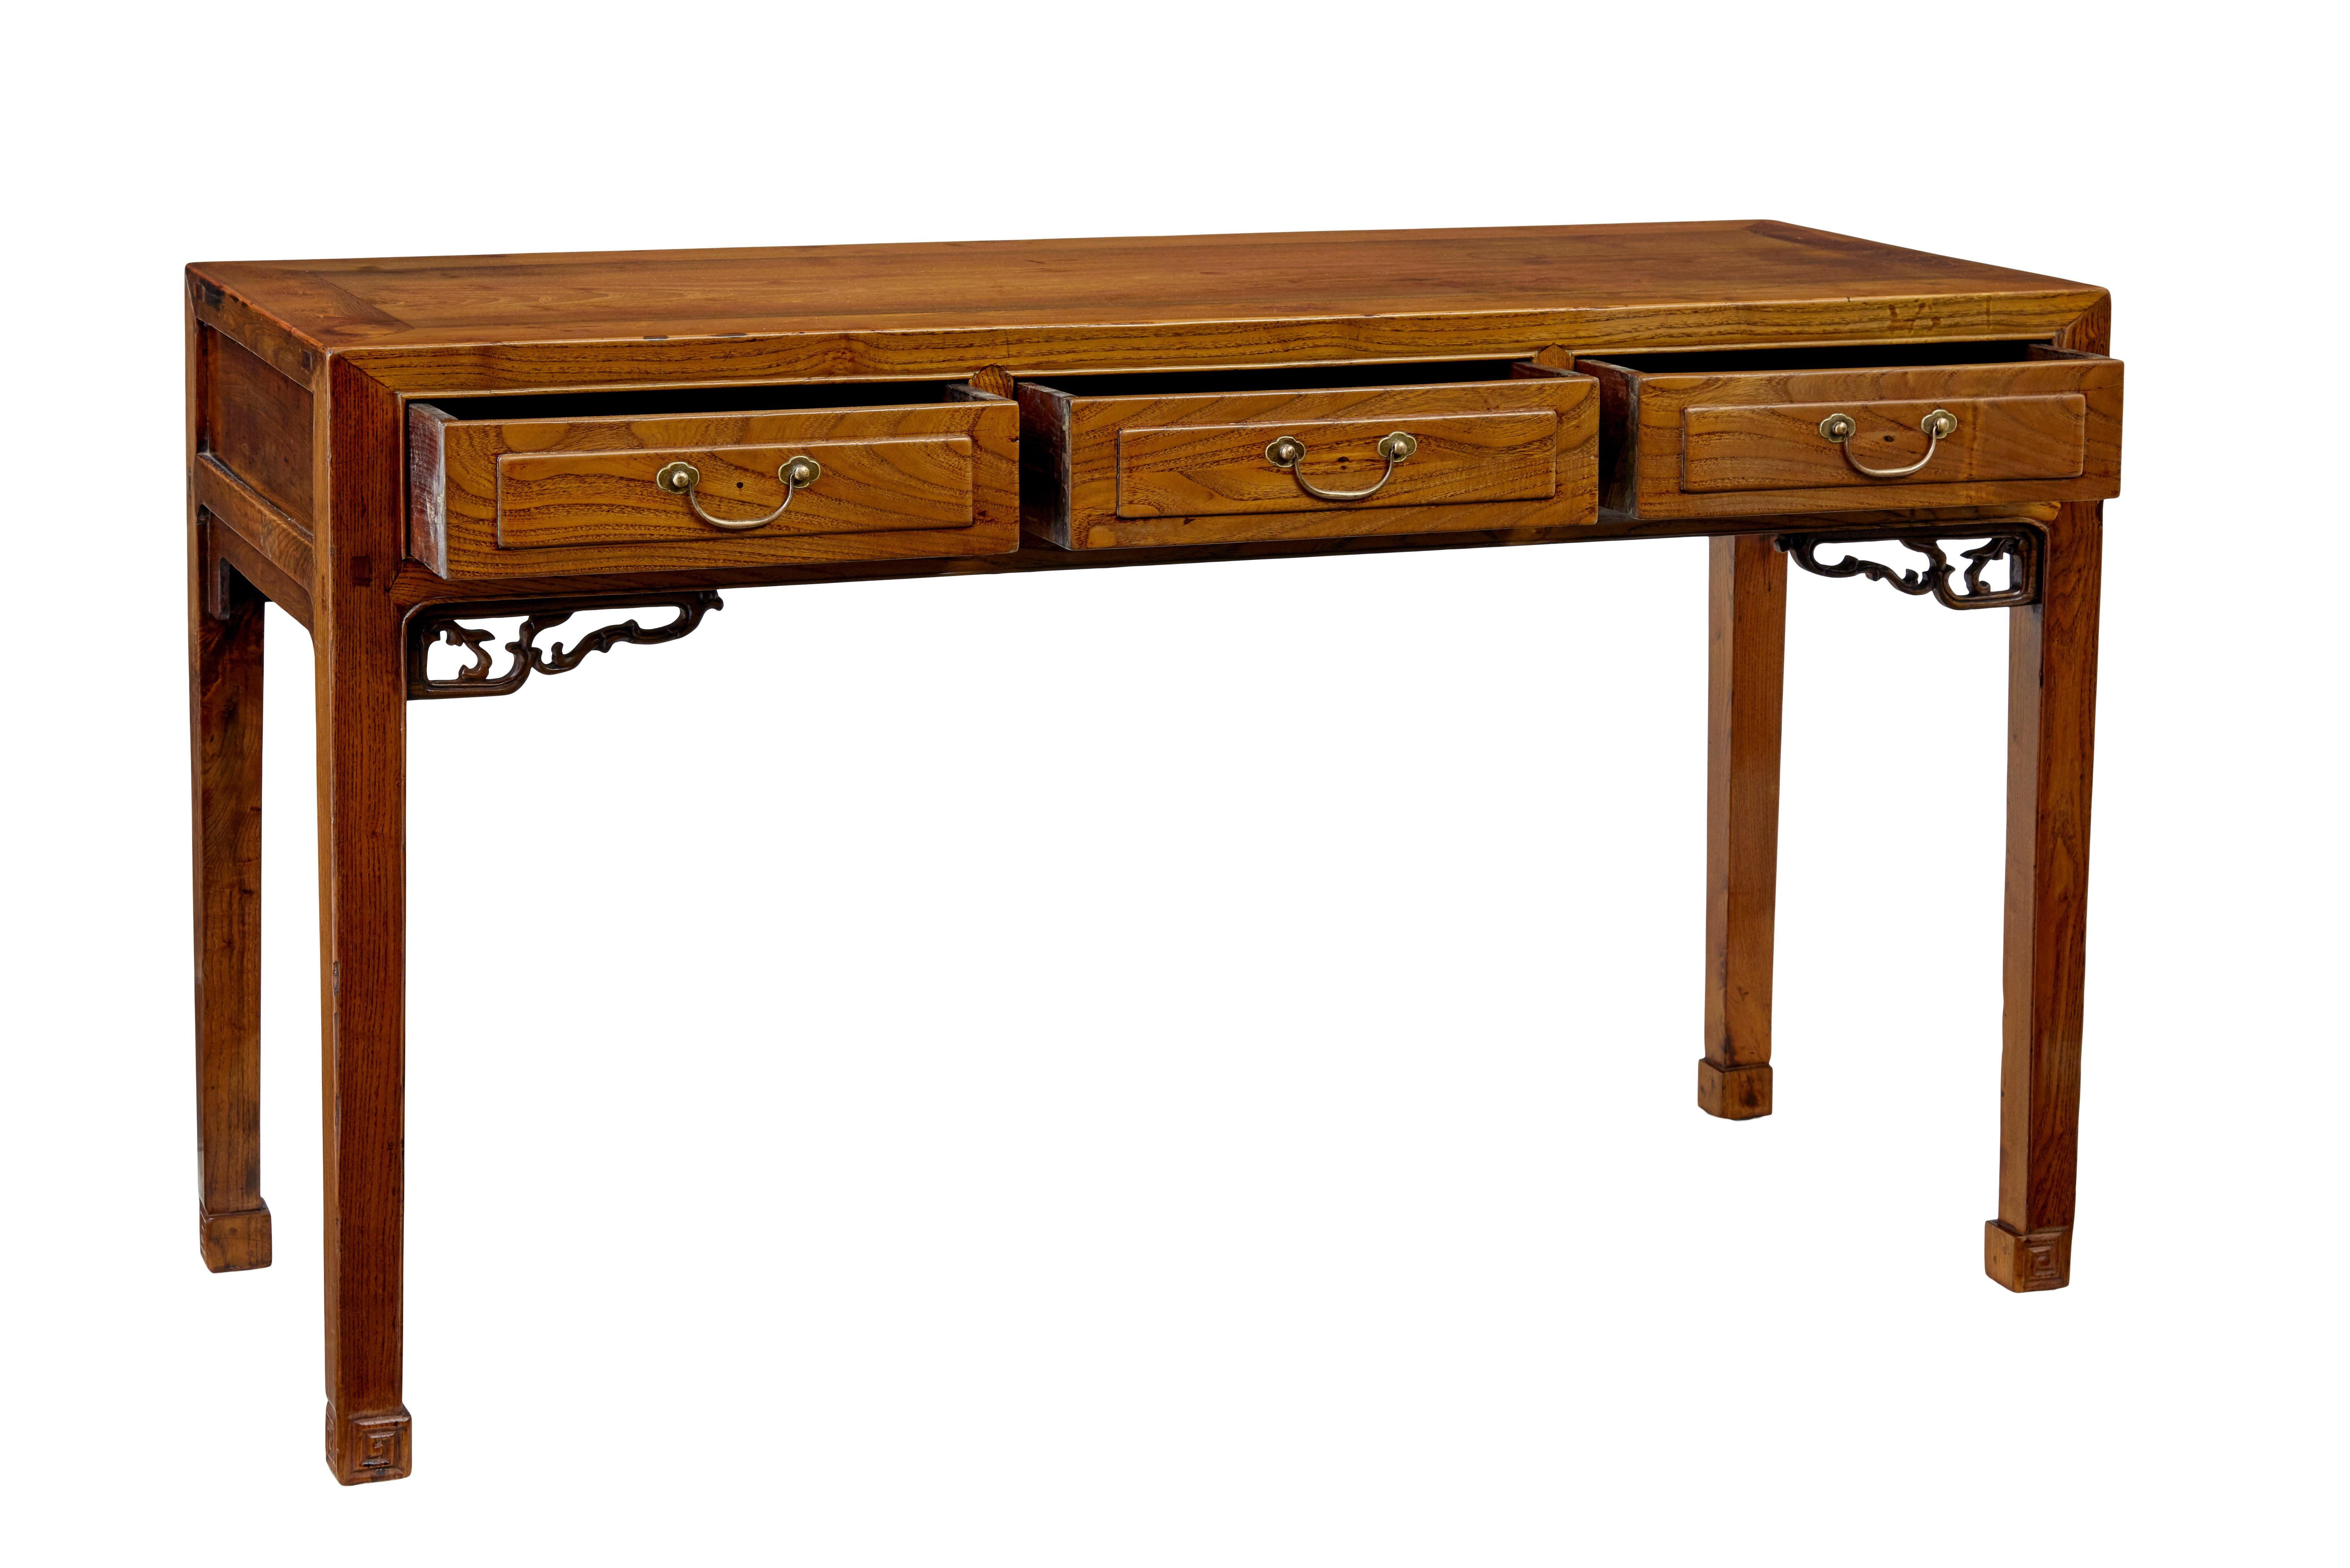 19th century elm Chinese console table sideboard circa 1890.

Good quality console table, which could be used in multiple rooms around the home such as the living room, hallway or bedroom.

3 drawers below the rectangular top, fitted with brass